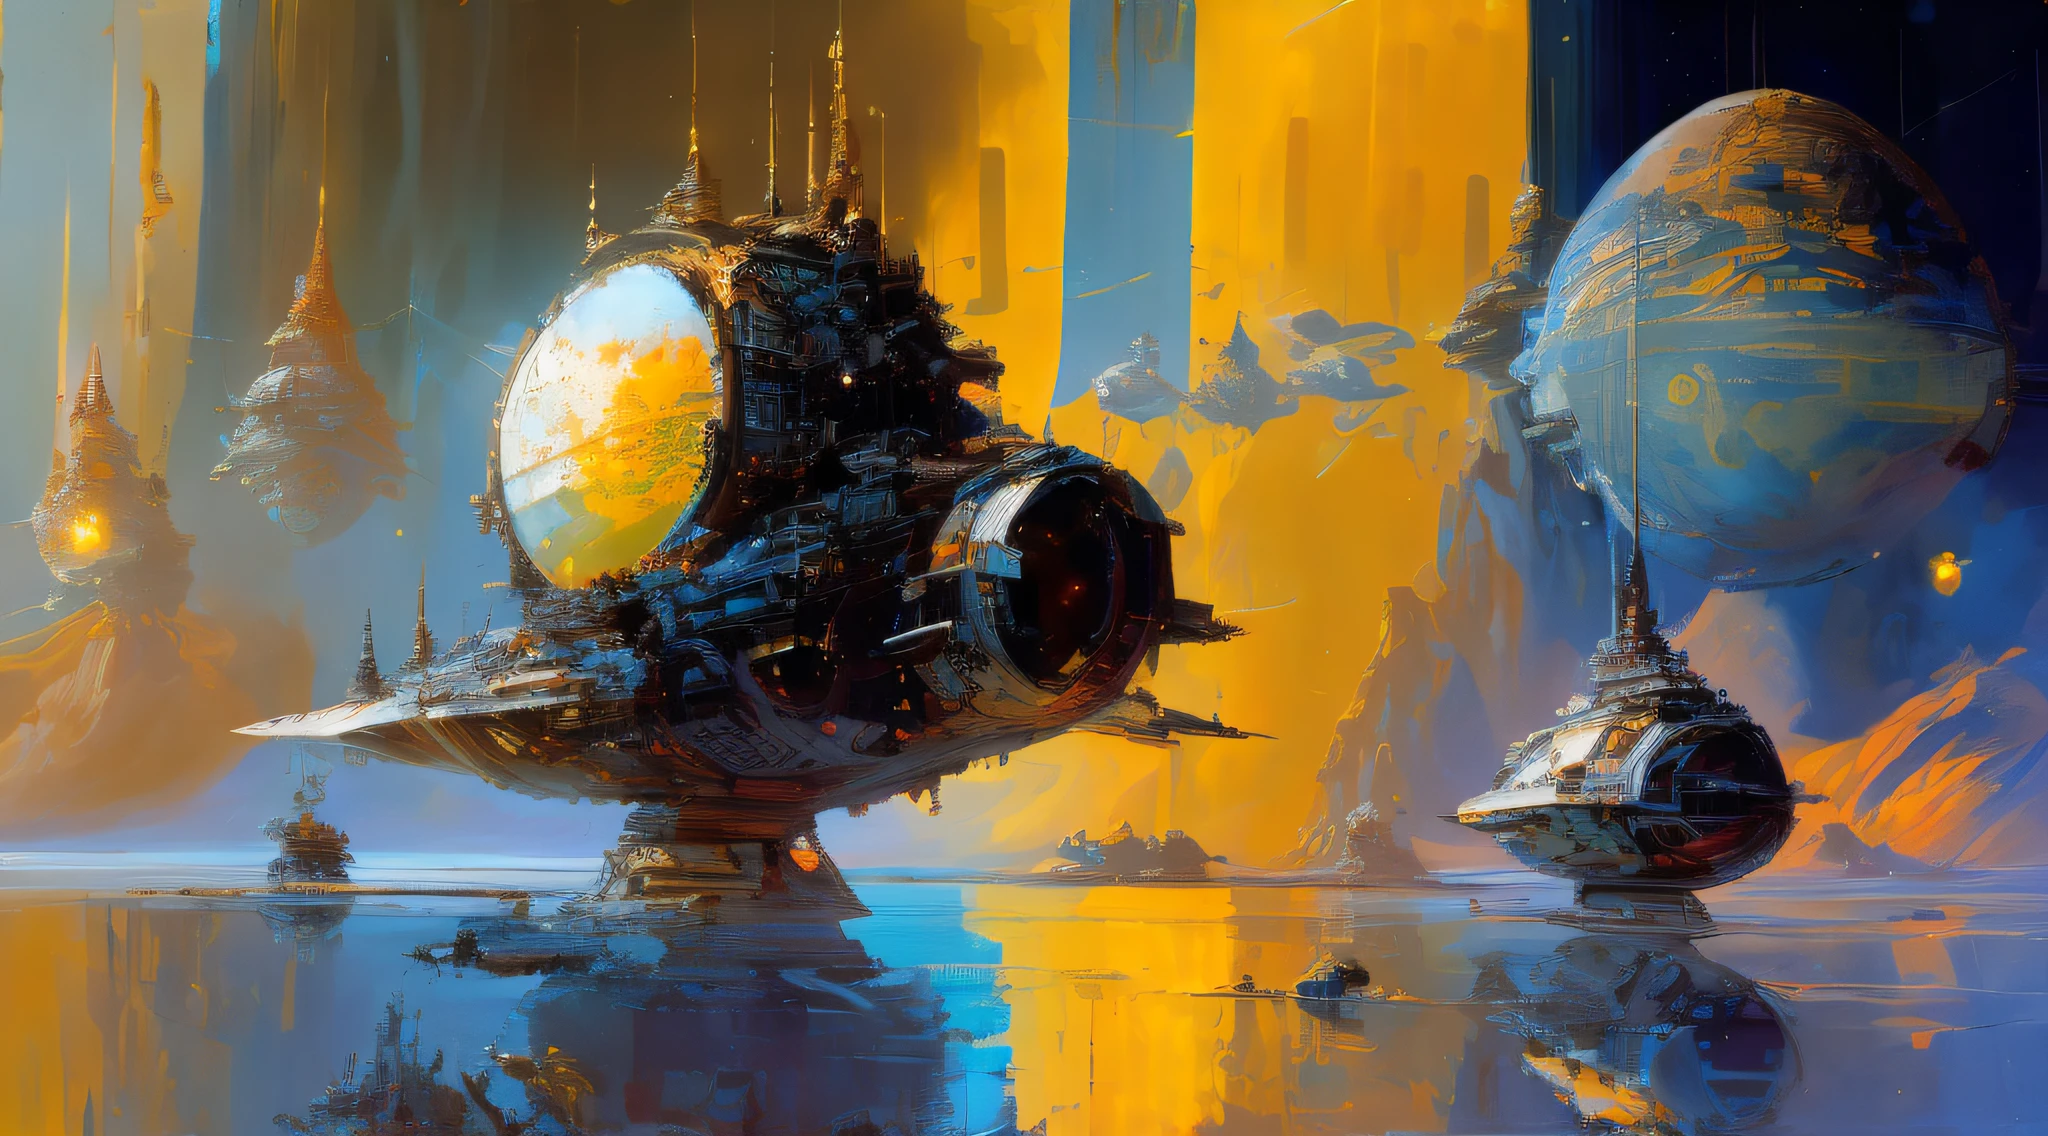 by John Berkey satellites in space orbit around the Earth, John Berkey space art style cinematography, atmospheric, photorealistic, elegant composition, Depth of Field, DOF, Tilt Blur, White Balance, 32k, Super-Resolution, Megapixel, ProPhoto RGB, VR, Halfrear Lighting, Backlight, Natural Lighting, Incandescent, Optical Fiber, Moody Lighting, Cinematic Lighting, Studio Lighting, Soft Lighting, Volumetric, Contre-Jour, Beautiful Lighting, Accent Lighting, Global Illumination, Screen Space Global Illumination, Ray Tracing Global Illumination, Optics, Scattering, Glowing, Shadows, Rough, Shimmering, Ray Tracing Reflections, Lumen Reflections, Screen Space Reflections, Diffraction Grading, Chromatic Aberration, GB Displacement, Scan Lines, Ray Traced, Ray Tracing Ambient Occlusion, Anti-Aliasing, FKAA, TXAA, RTX, SSAO, Shaders, OpenGL-Shaders, GLSL-Shaders, Post Processing, Post-Production, Cel Shading, Tone Mapping, CGI, VFX, SFX, insanely detailed and intricate, hypermaximalist, elegant, hyper realistic, super detailed, dynamic pose, photography cinematic, intense, cinematic composition + intricate detailed, cinematic lighting + rim lighting + color grading + focus + bokeh, 1X + Unsplash + 500px, taken by Canon EOS R5 RF85mm F1.8 MACRO lens 1/100sec